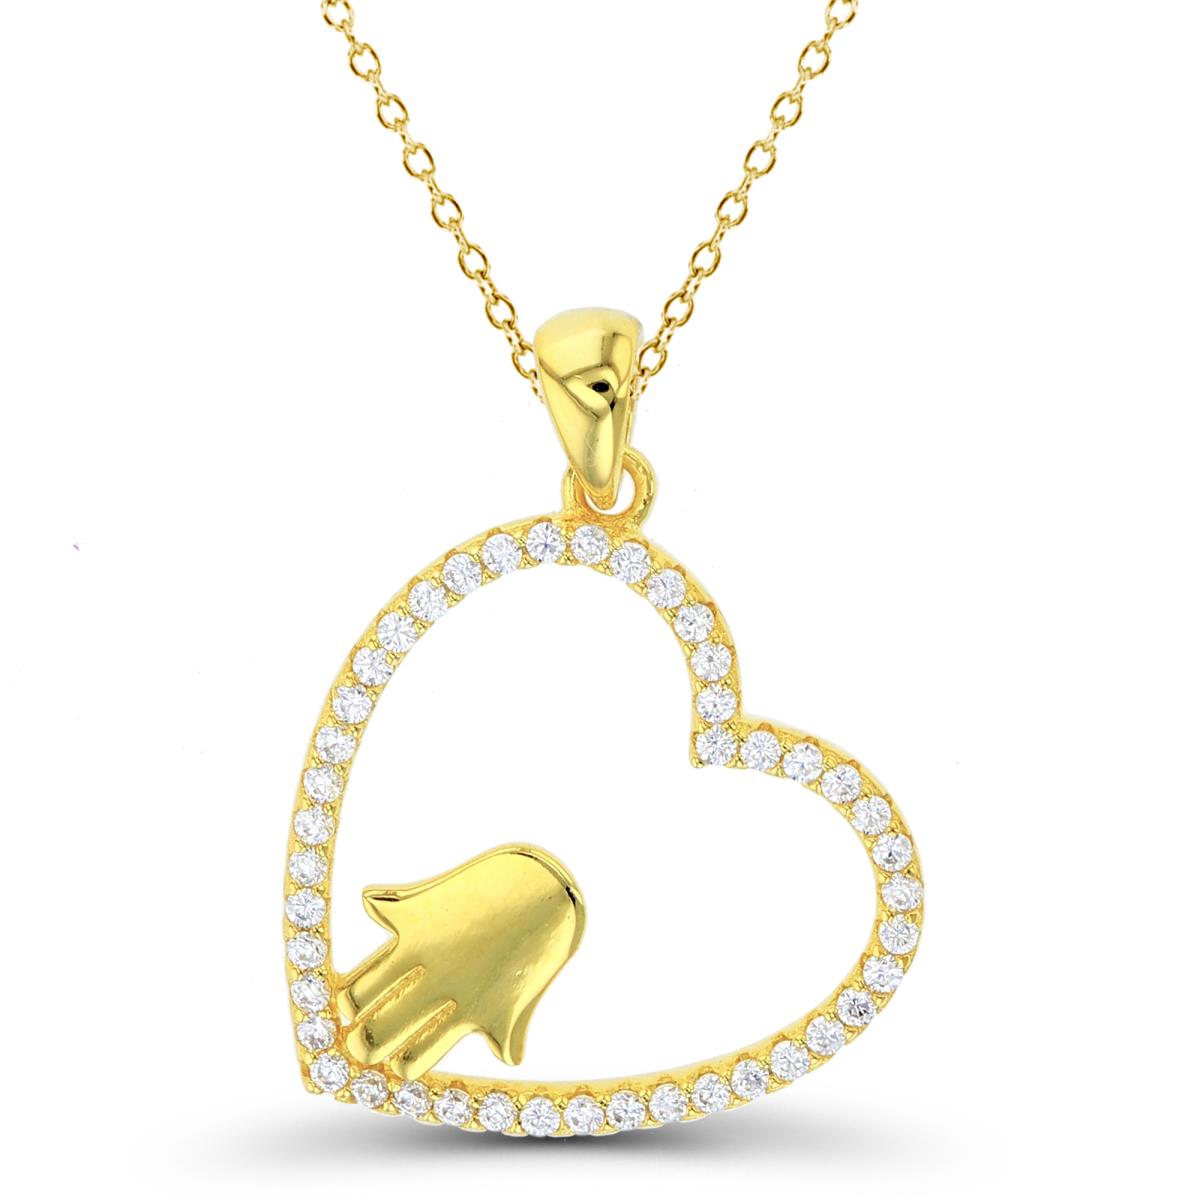 Sterling Silver+1Micron Yellow Gold High Polish Hamsa in White CZ Open Heart 18"Necklace